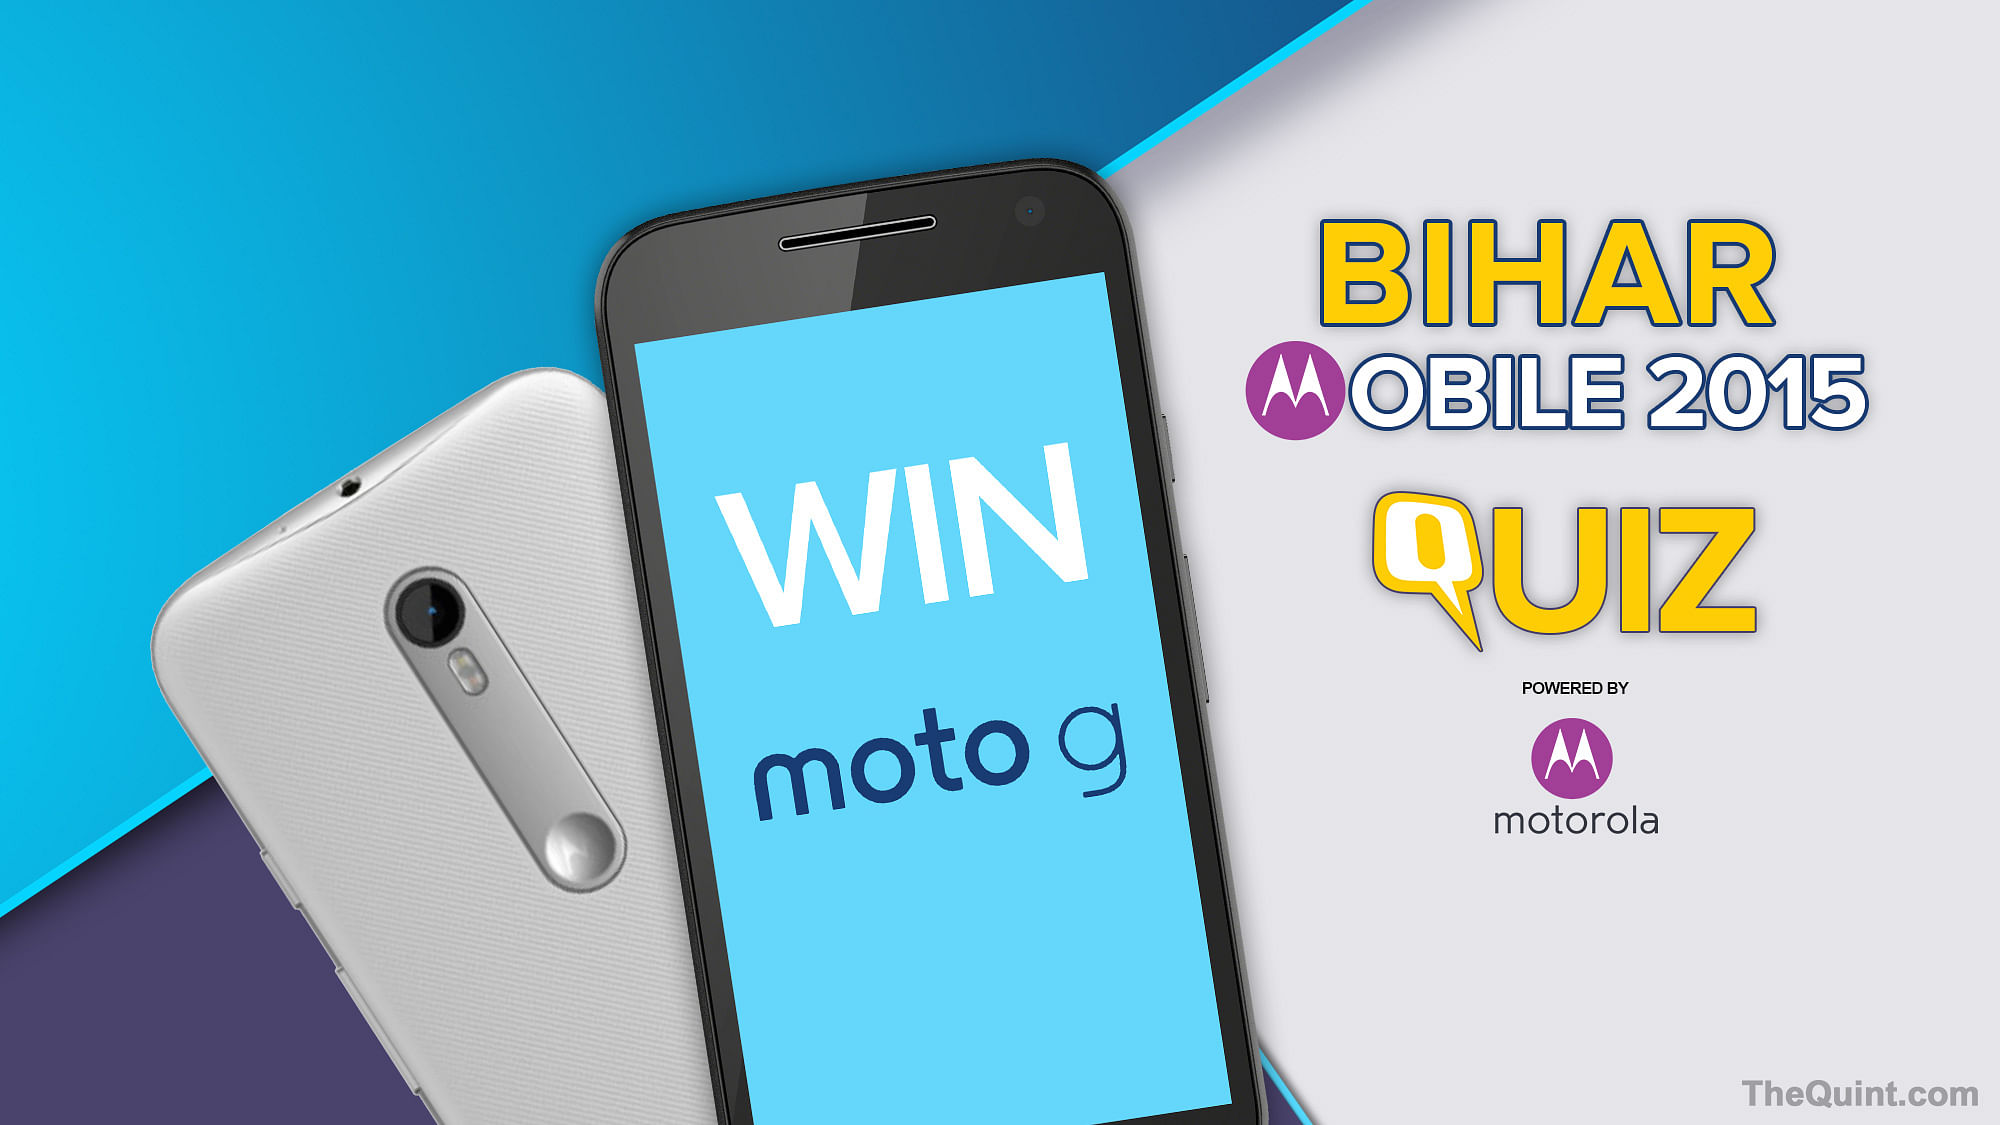 Here’s a chance to win a moto g smartphone, all you have to do is answer these questions. (Photo: iStockphoto)